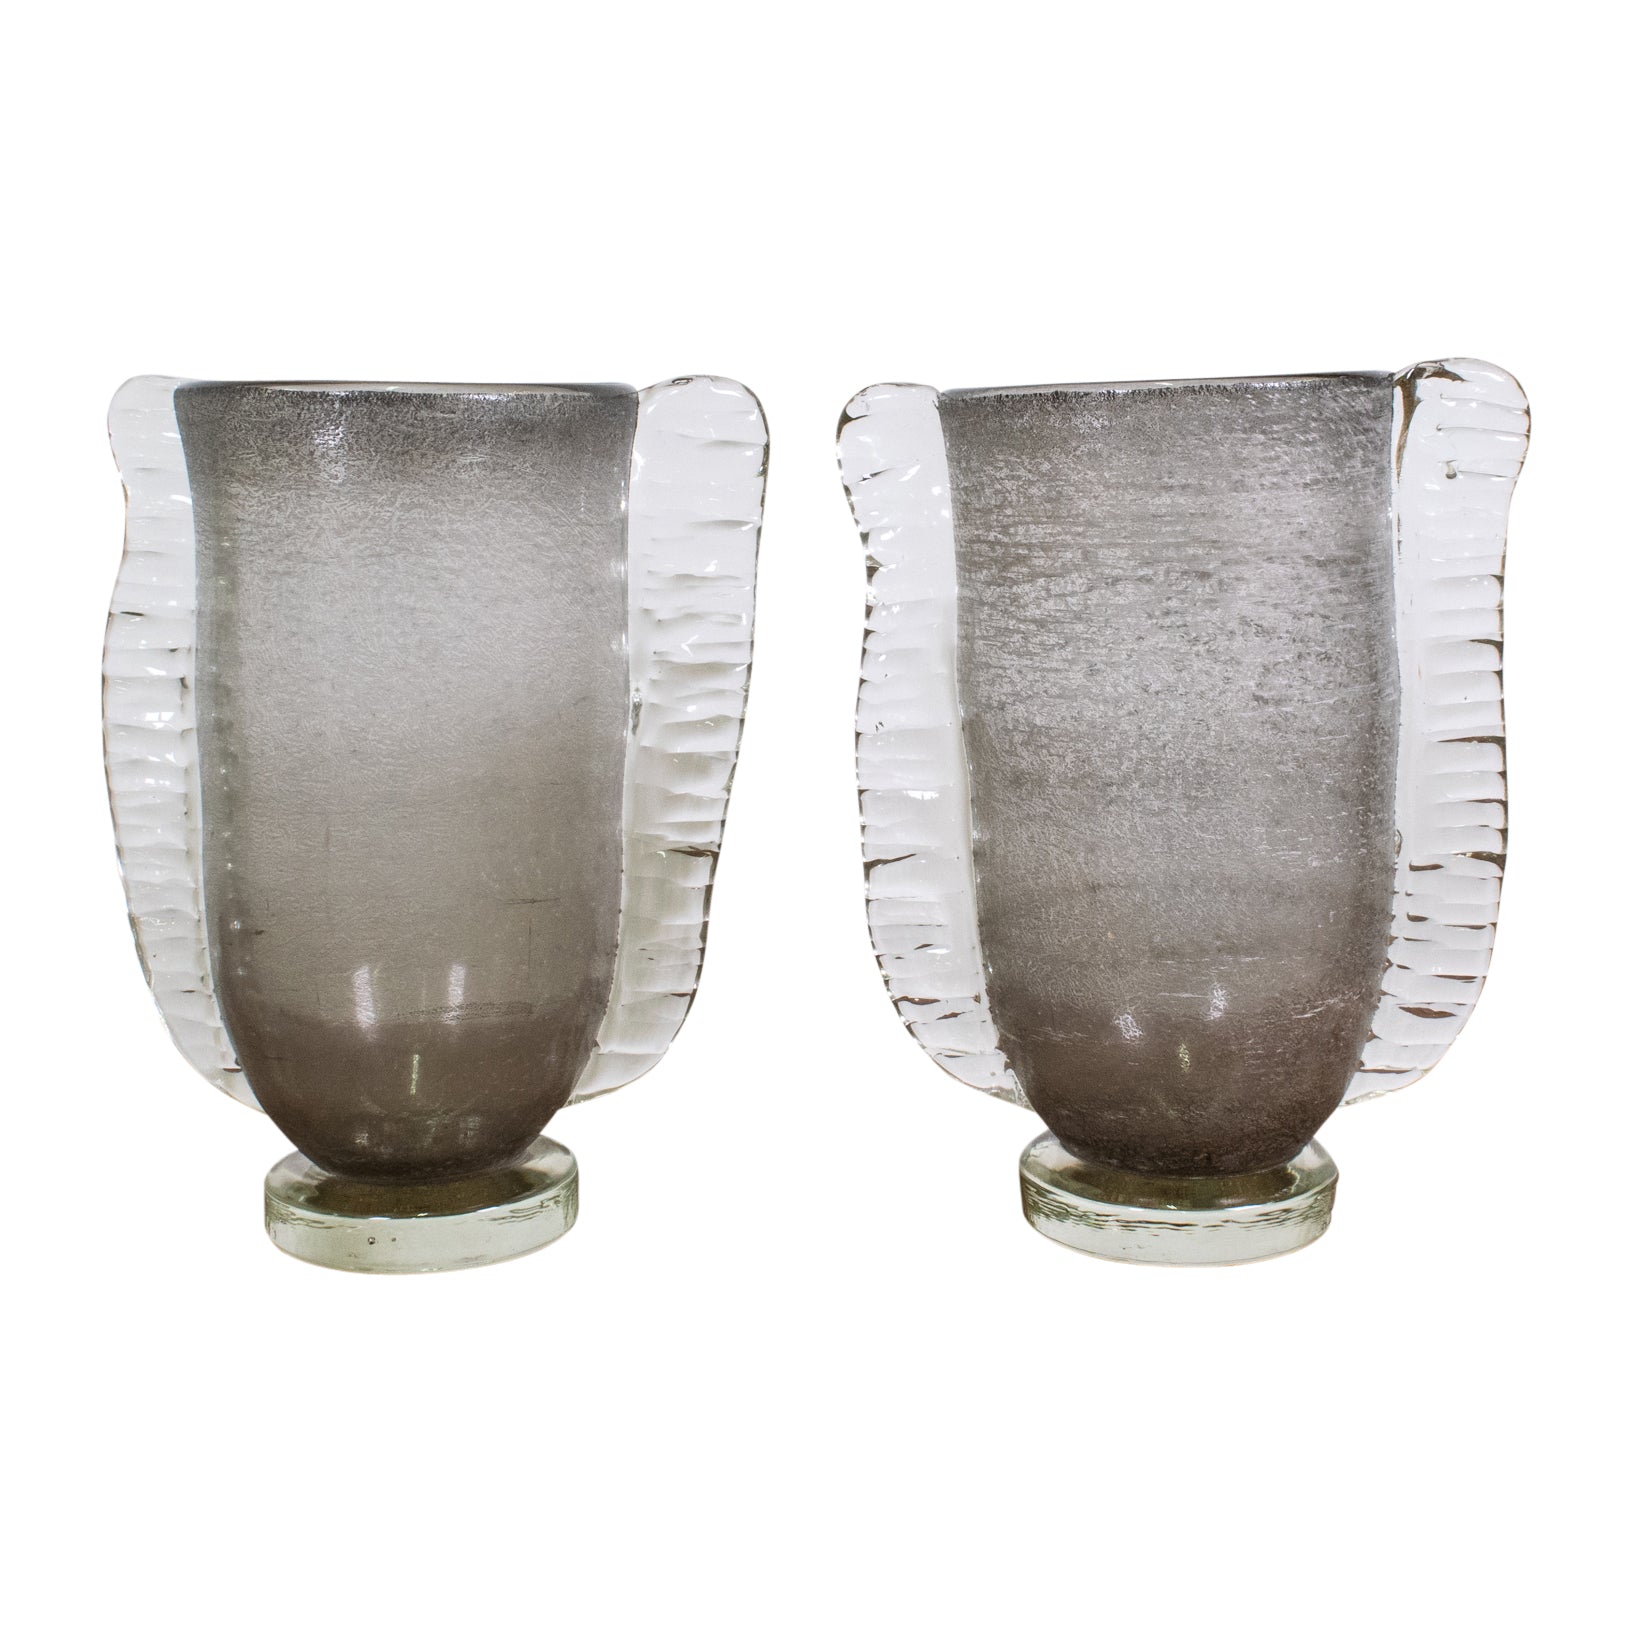 A Pair of  "Graffiato" Murano Vase with applied Clear Handles